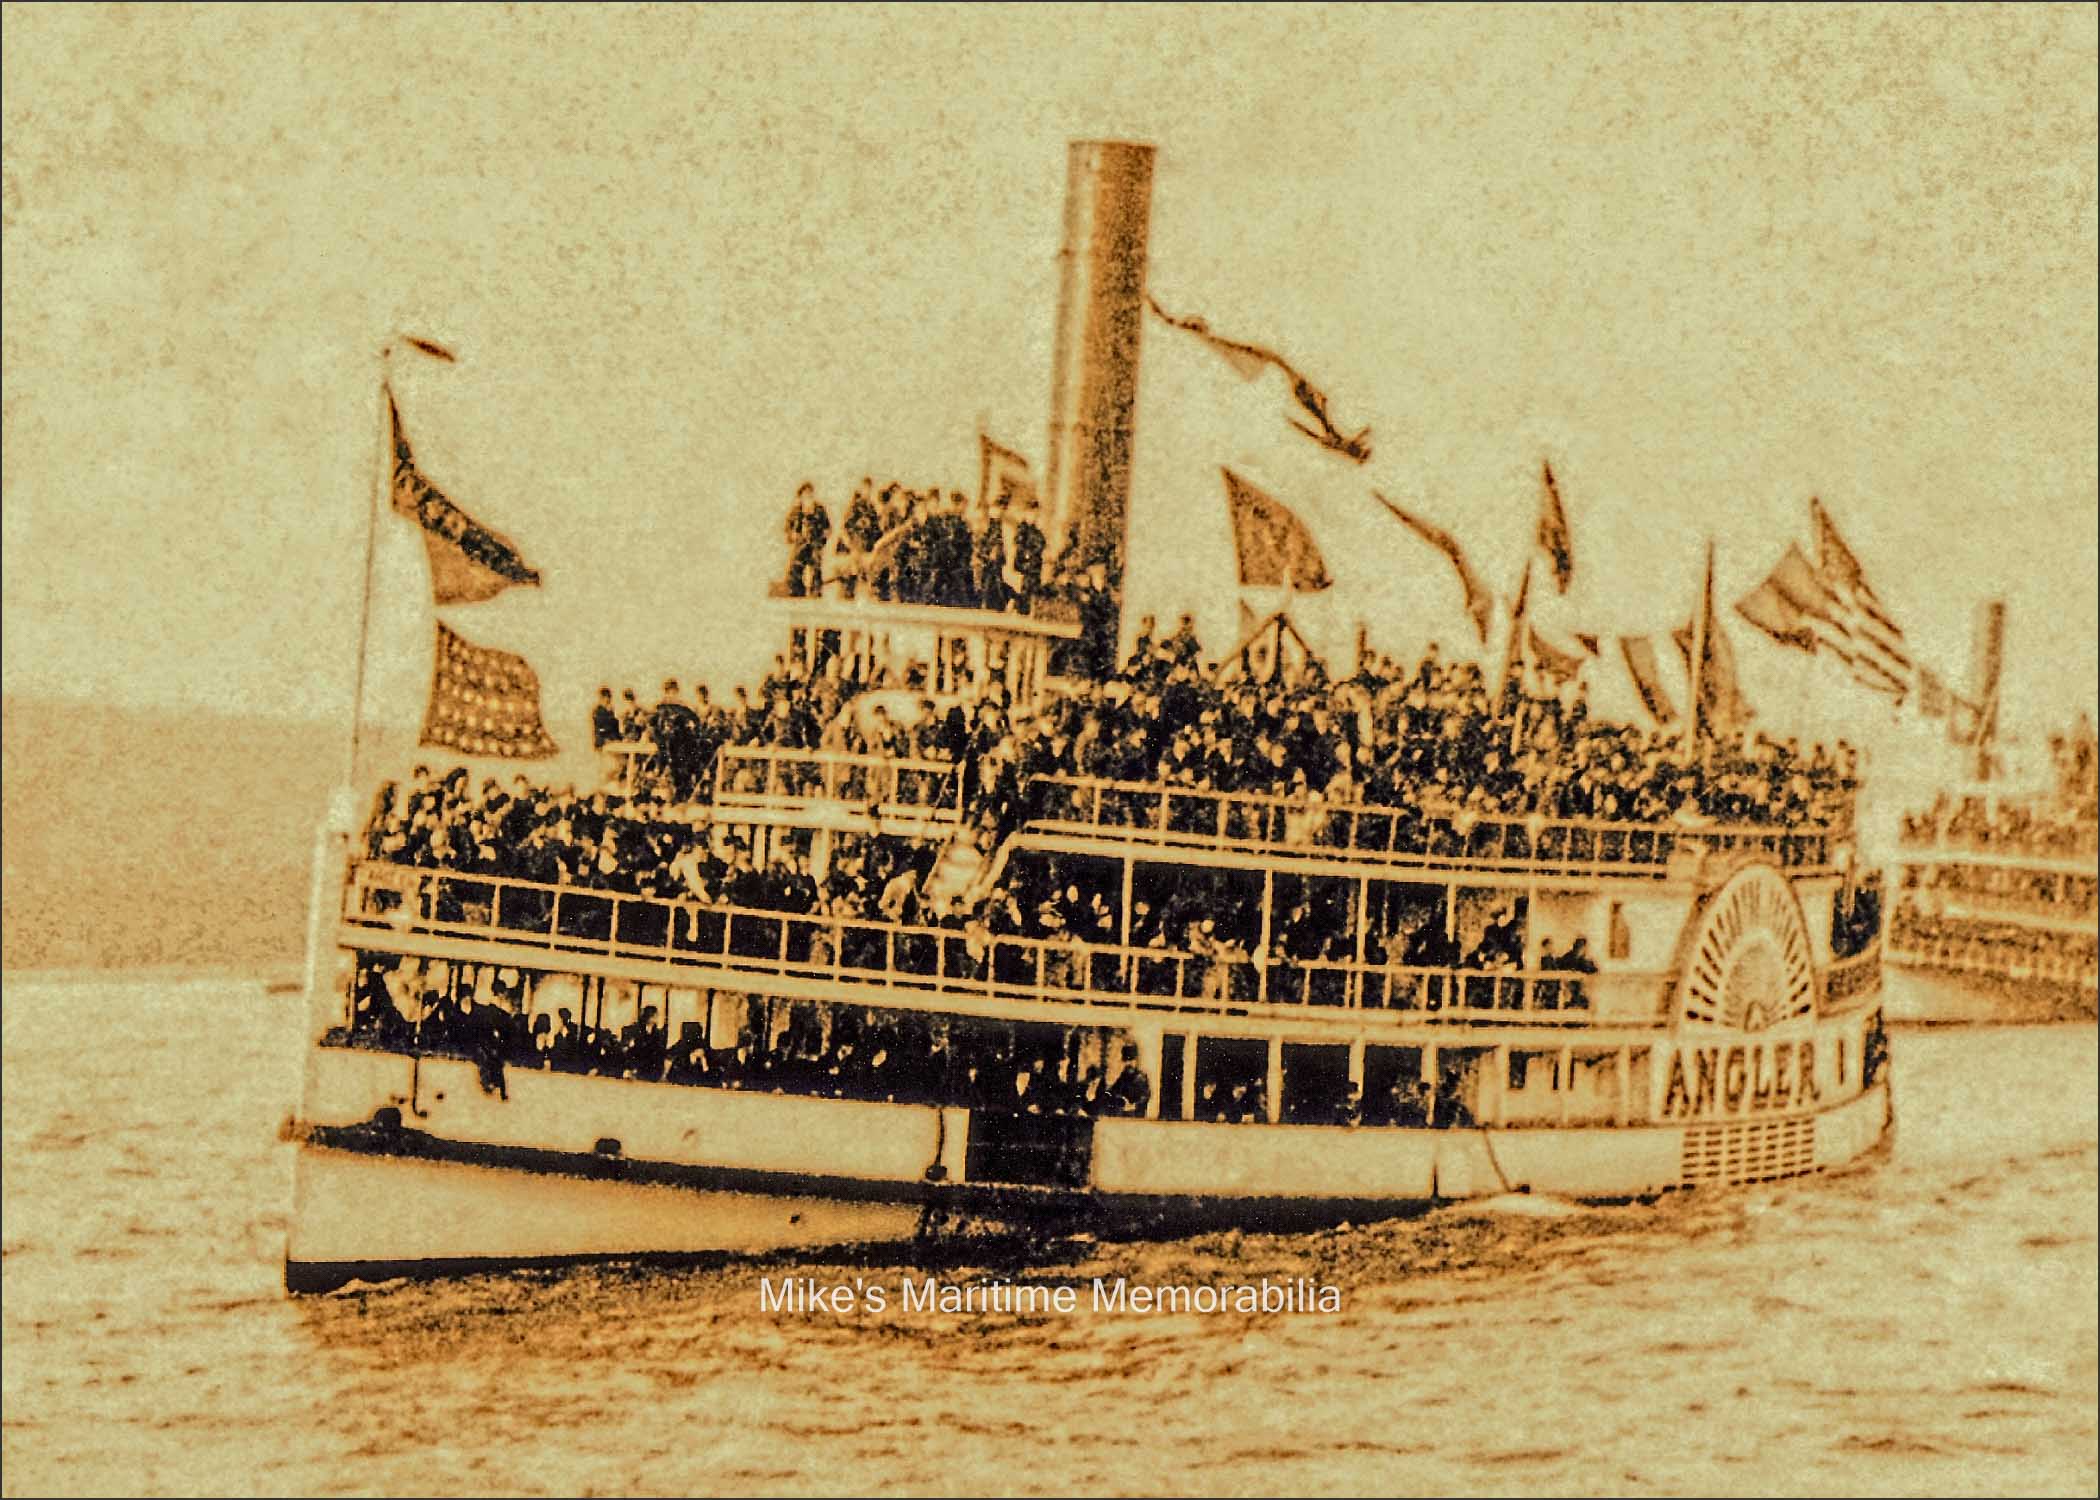 ANGLER, New York, NY – 1892 Now that's what we call being railed! The "ANGLER" (shown here during a non-fishing excursion trip) was a triple-decker steamboat that sailed on a regular schedule from Manhattan's East River to the fishing banks. This 166-foot sidewheeler was built in 1878 at Wilmington, DE as the excursion vessel "MARY MORGAN". She became Captain Al Foster's "ANGLER" in 1888 and was his first party fishing boat. Captain Foster was one of the first true deep sea party boat captains and pilots. He was responsible for locating and naming several of the New York Bight's best fishing grounds including 17 fathoms, Seagull Banks, England Banks and Middle Banks.